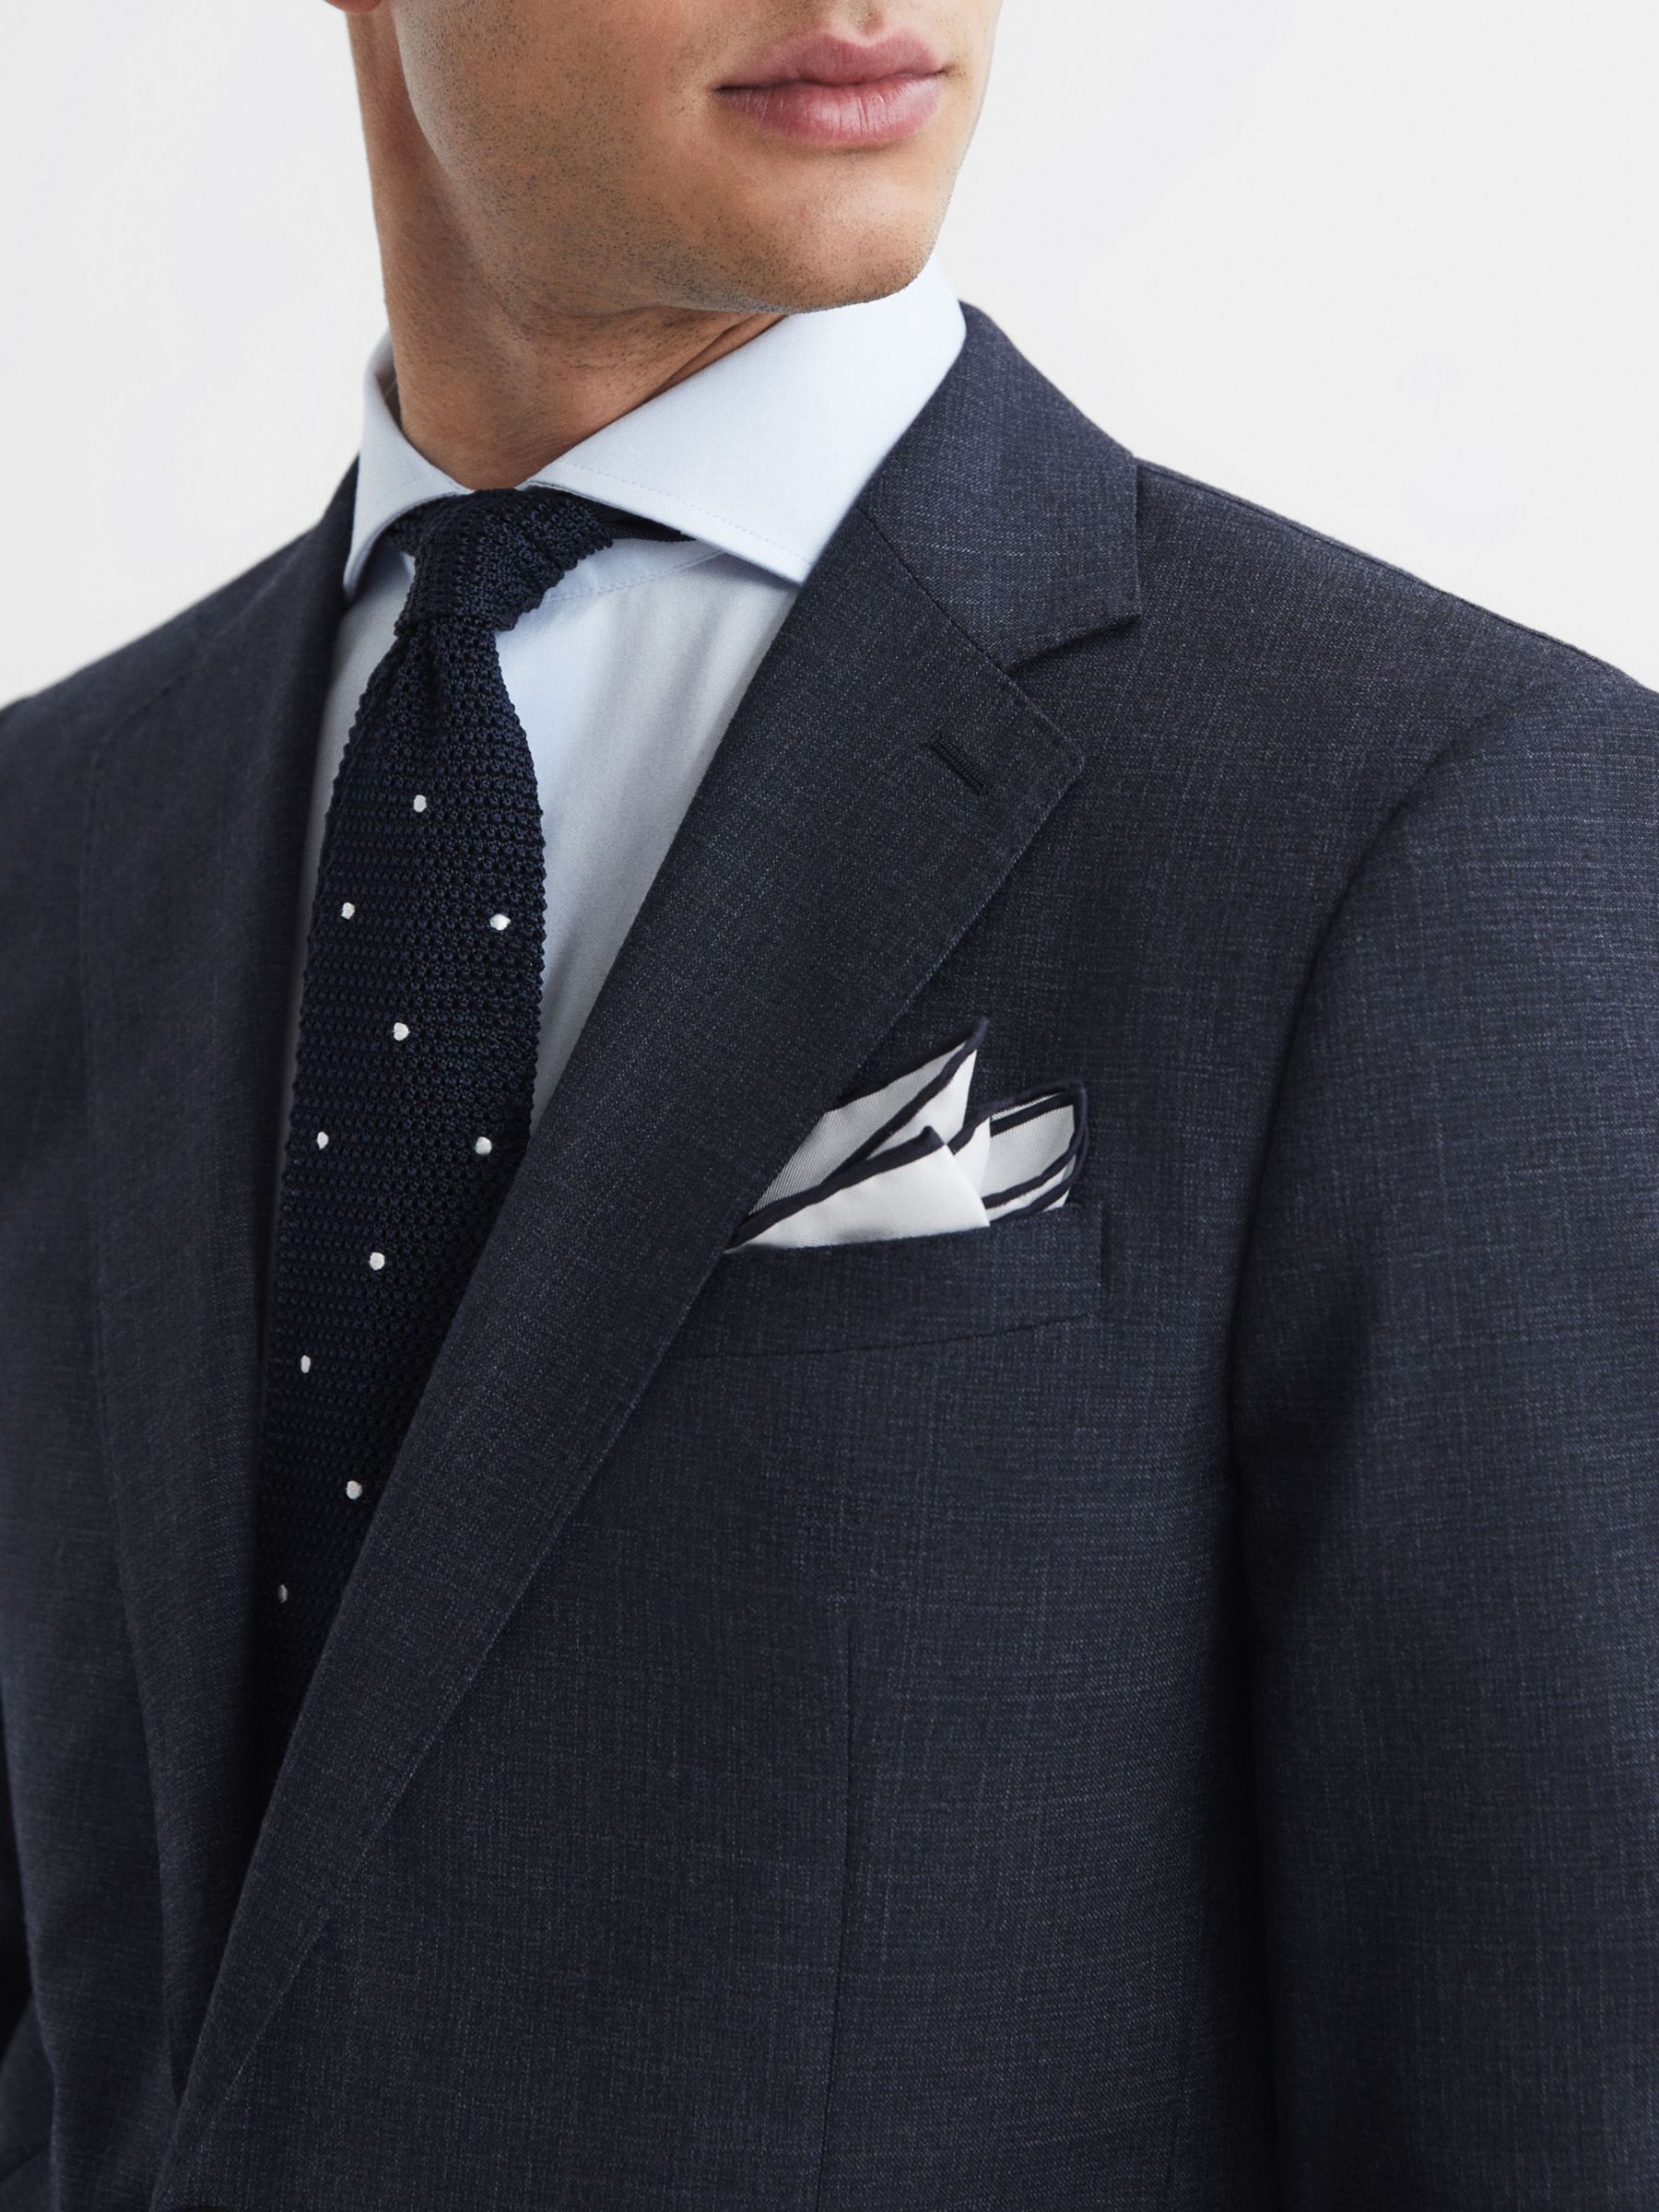 Buy Reiss Dunn Textured Wool Tailored Fit Suit Jacket, Navy Online at johnlewis.com